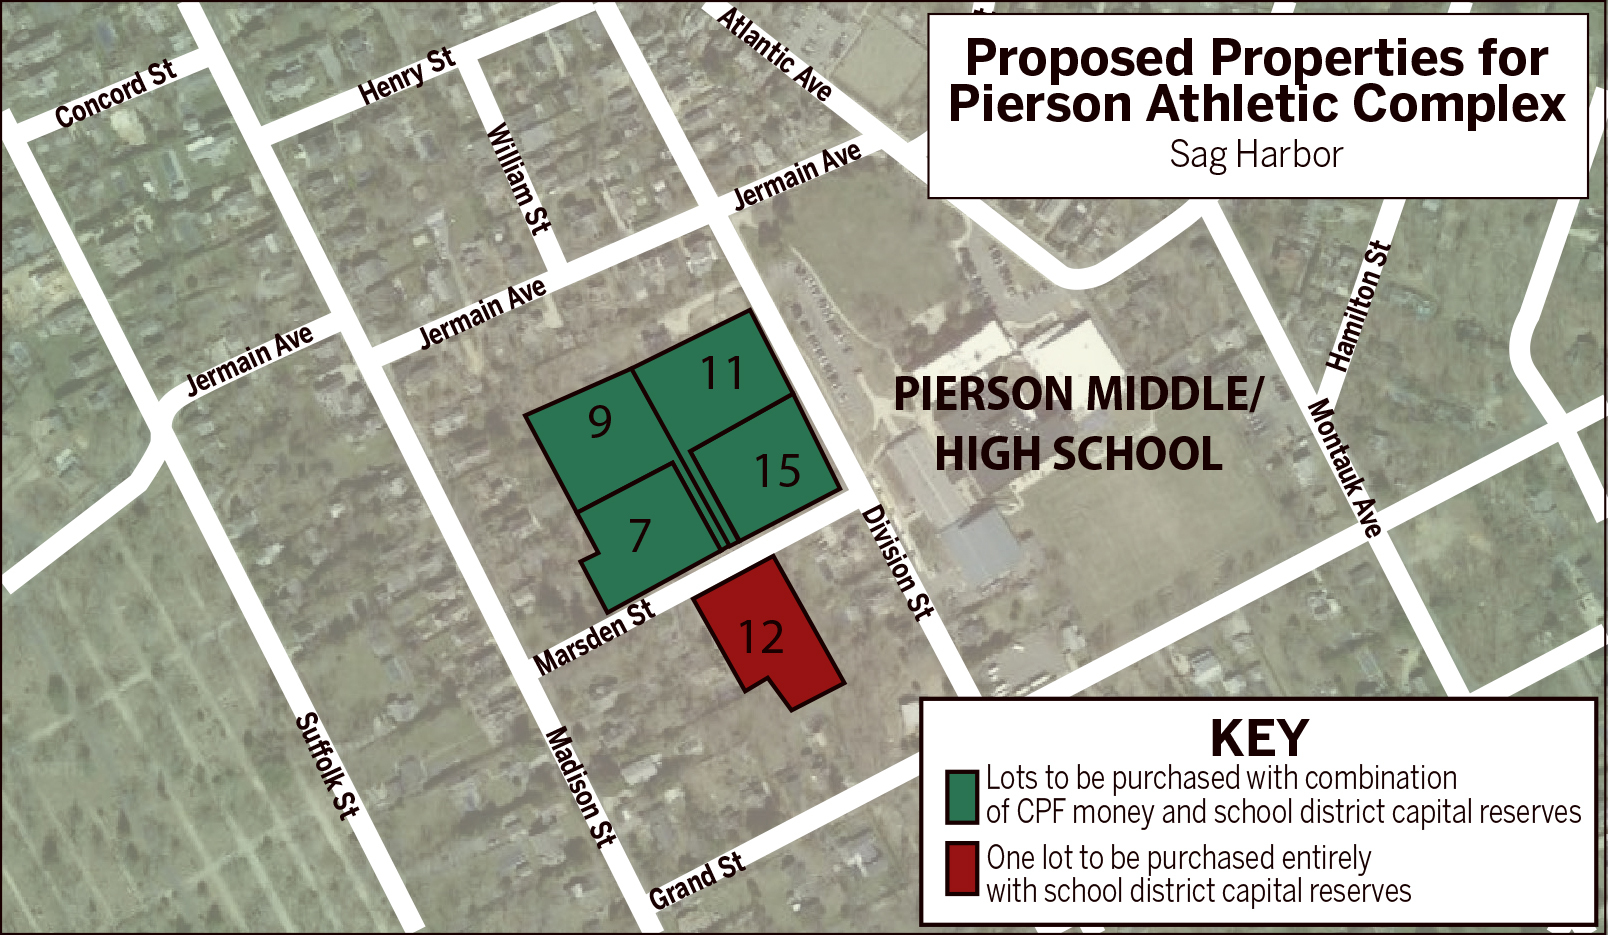 Proposed properties for Pierson athletic complex.